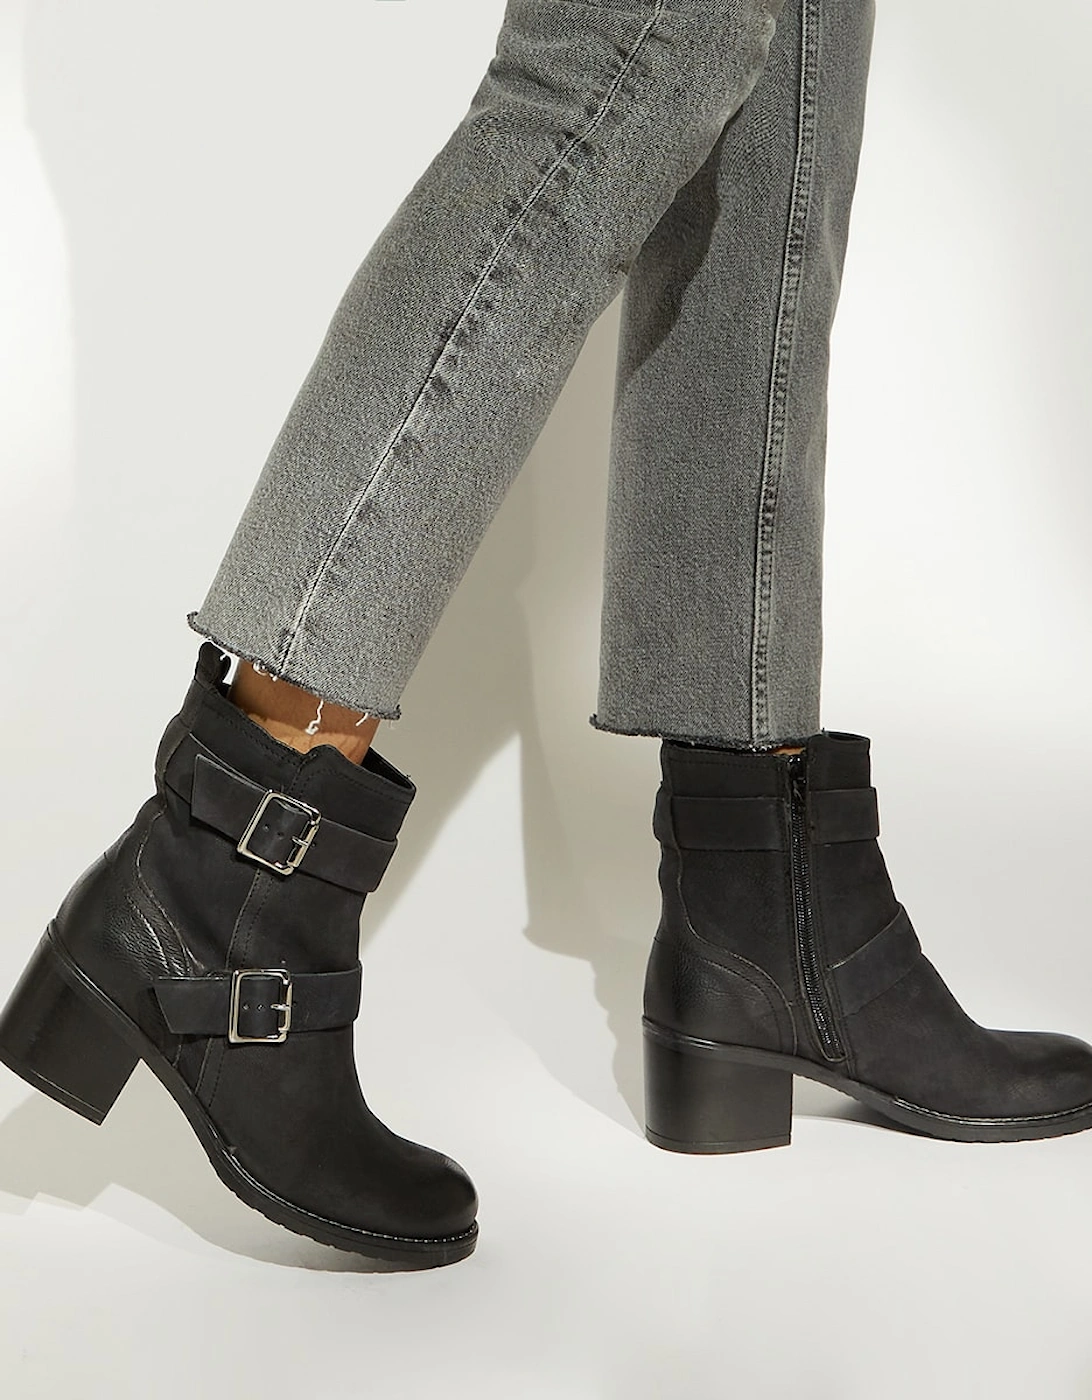 Ladies Poser - Buckle-Detail Ankle Boots